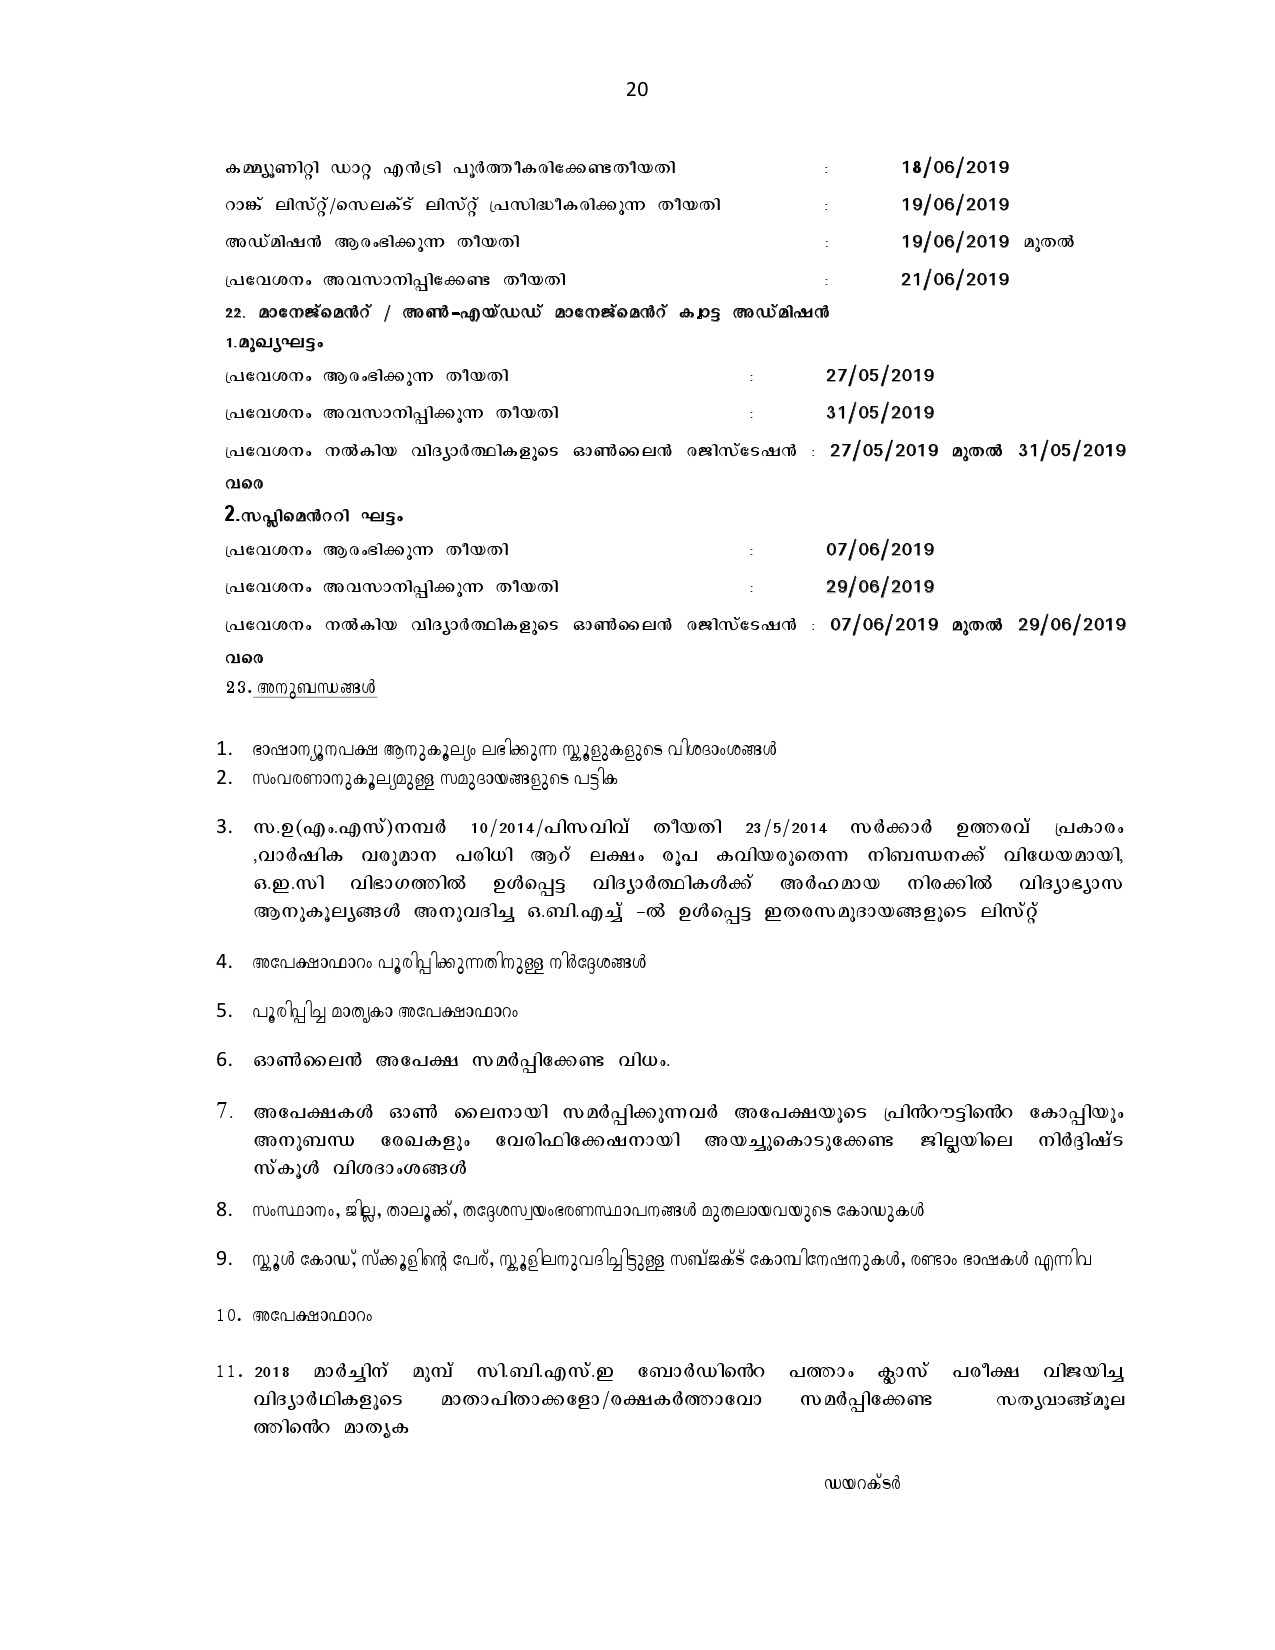 How To Apply For Kerala Higher Secondary Admission 2019 - Notification Image 20